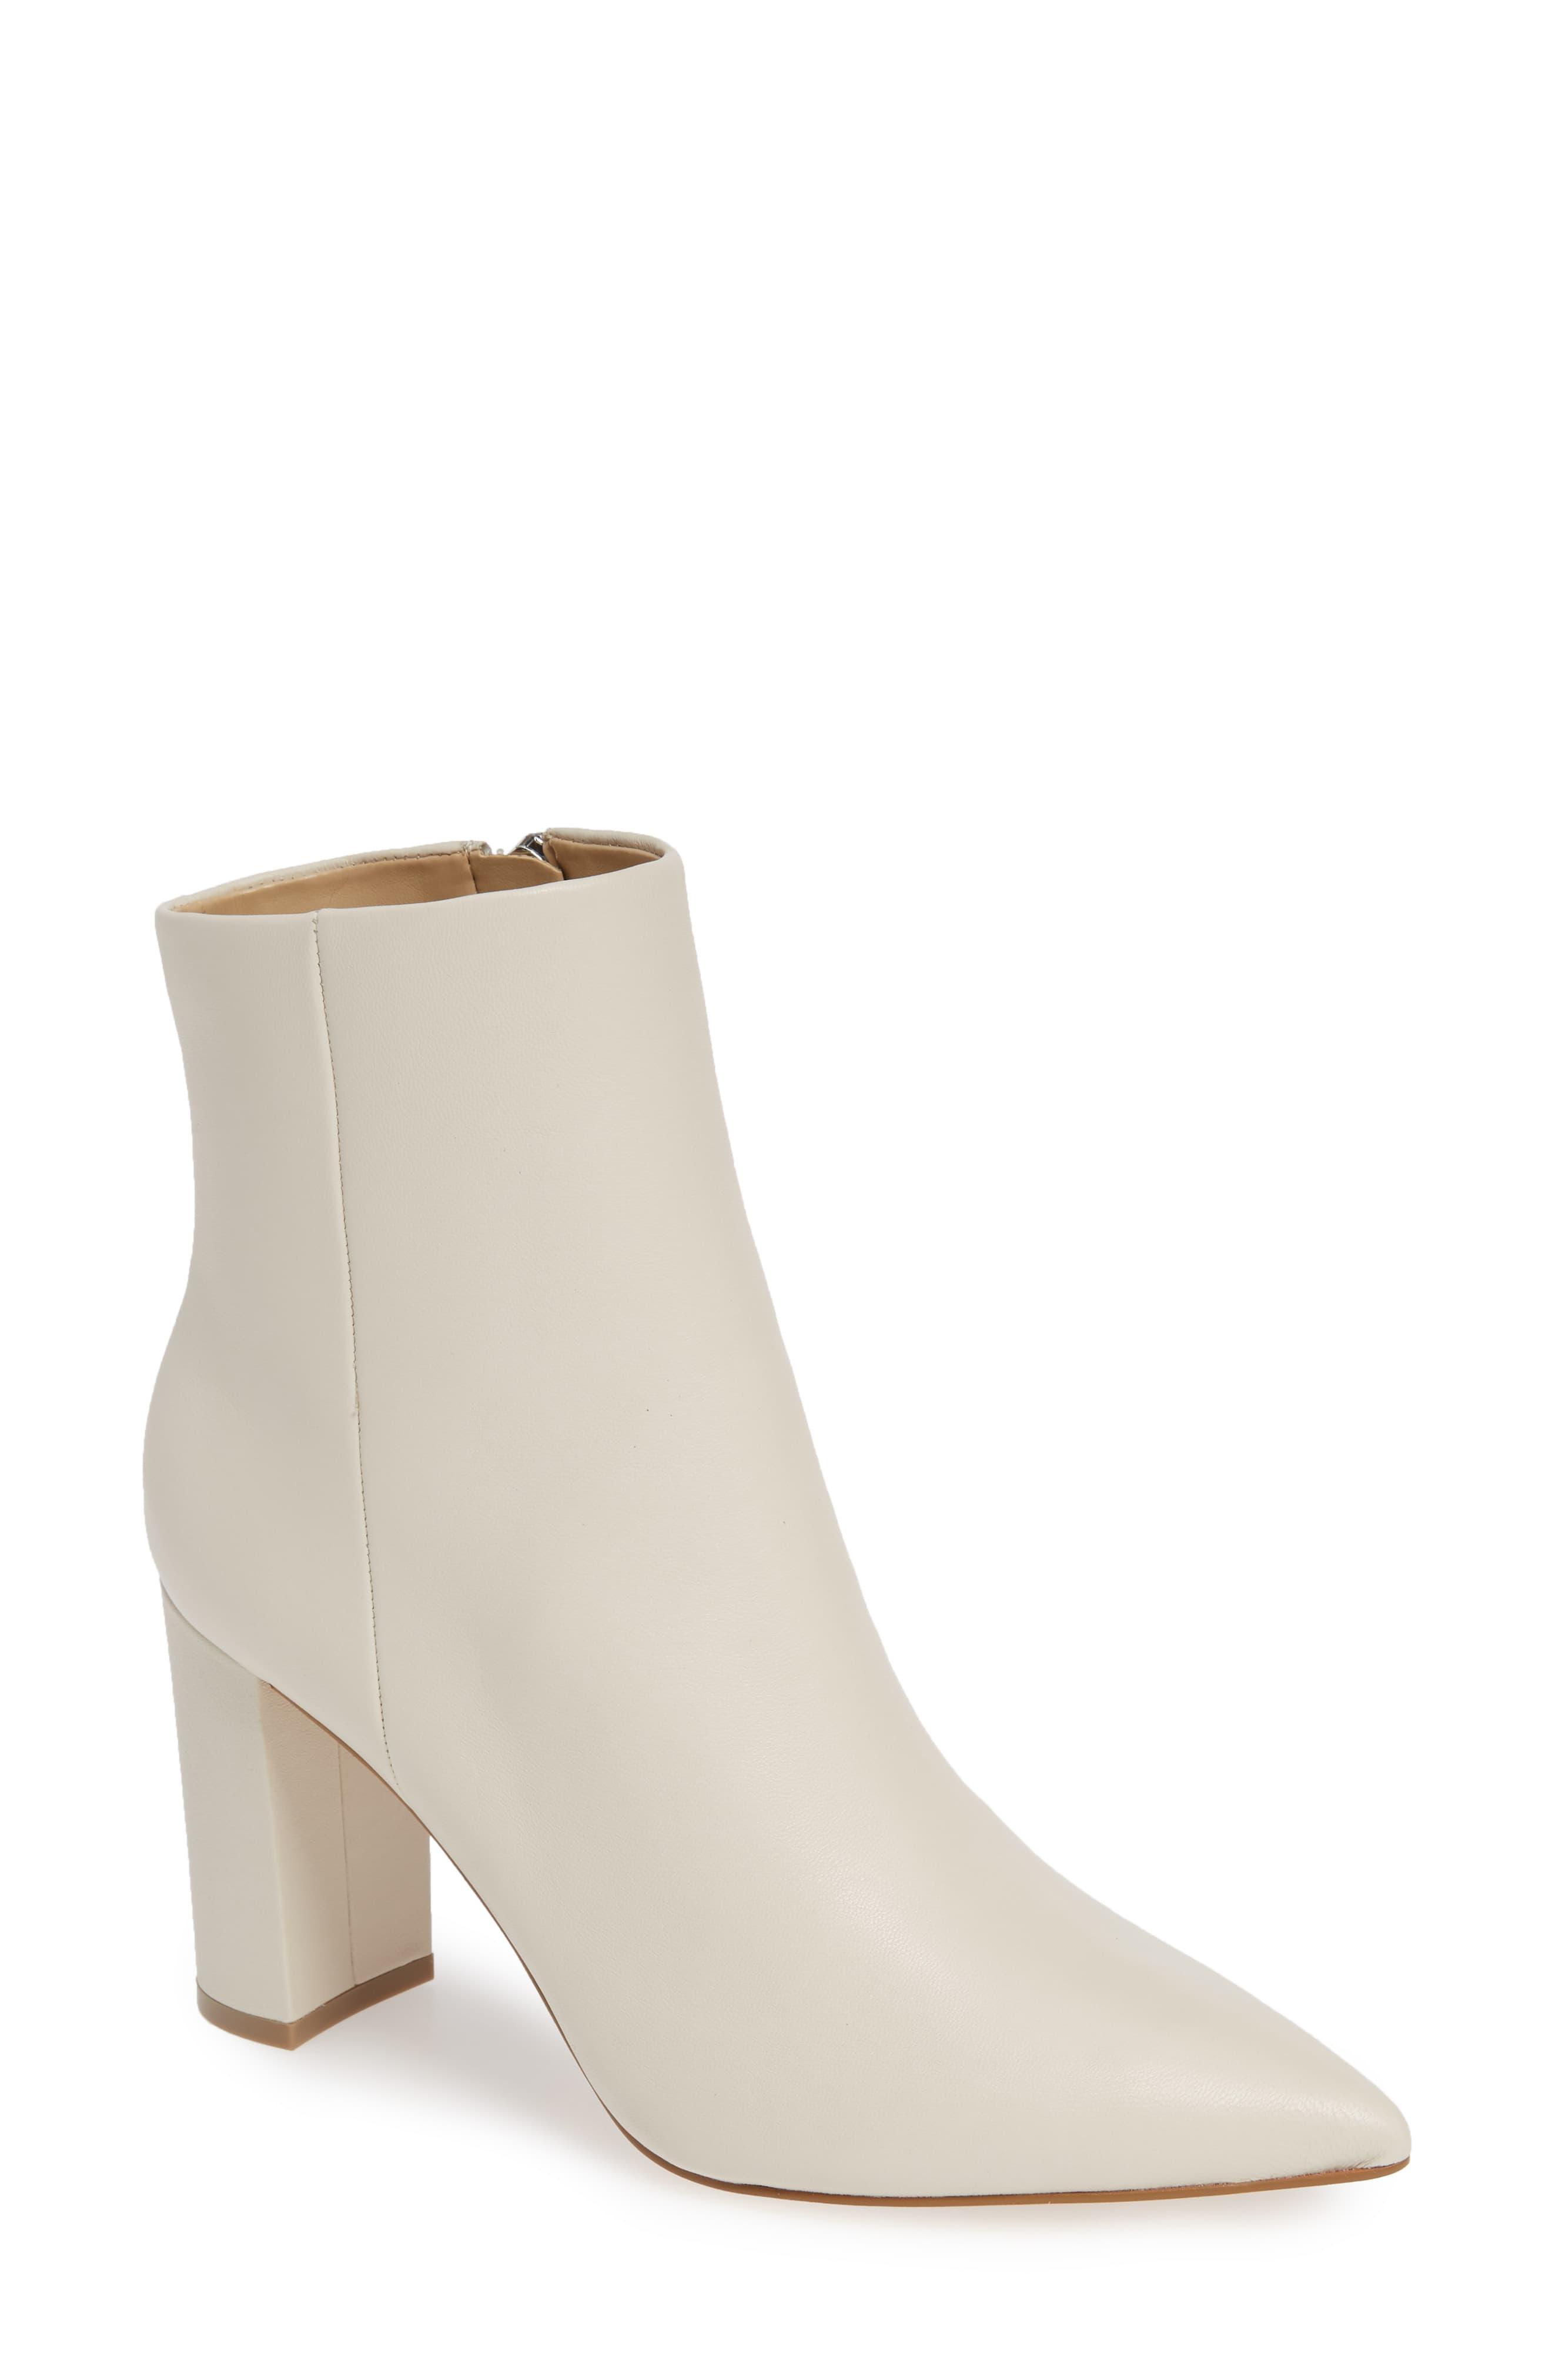 Marc Fisher Leather Ulani Pointy Toe Bootie in Ivory Leather (Black ...